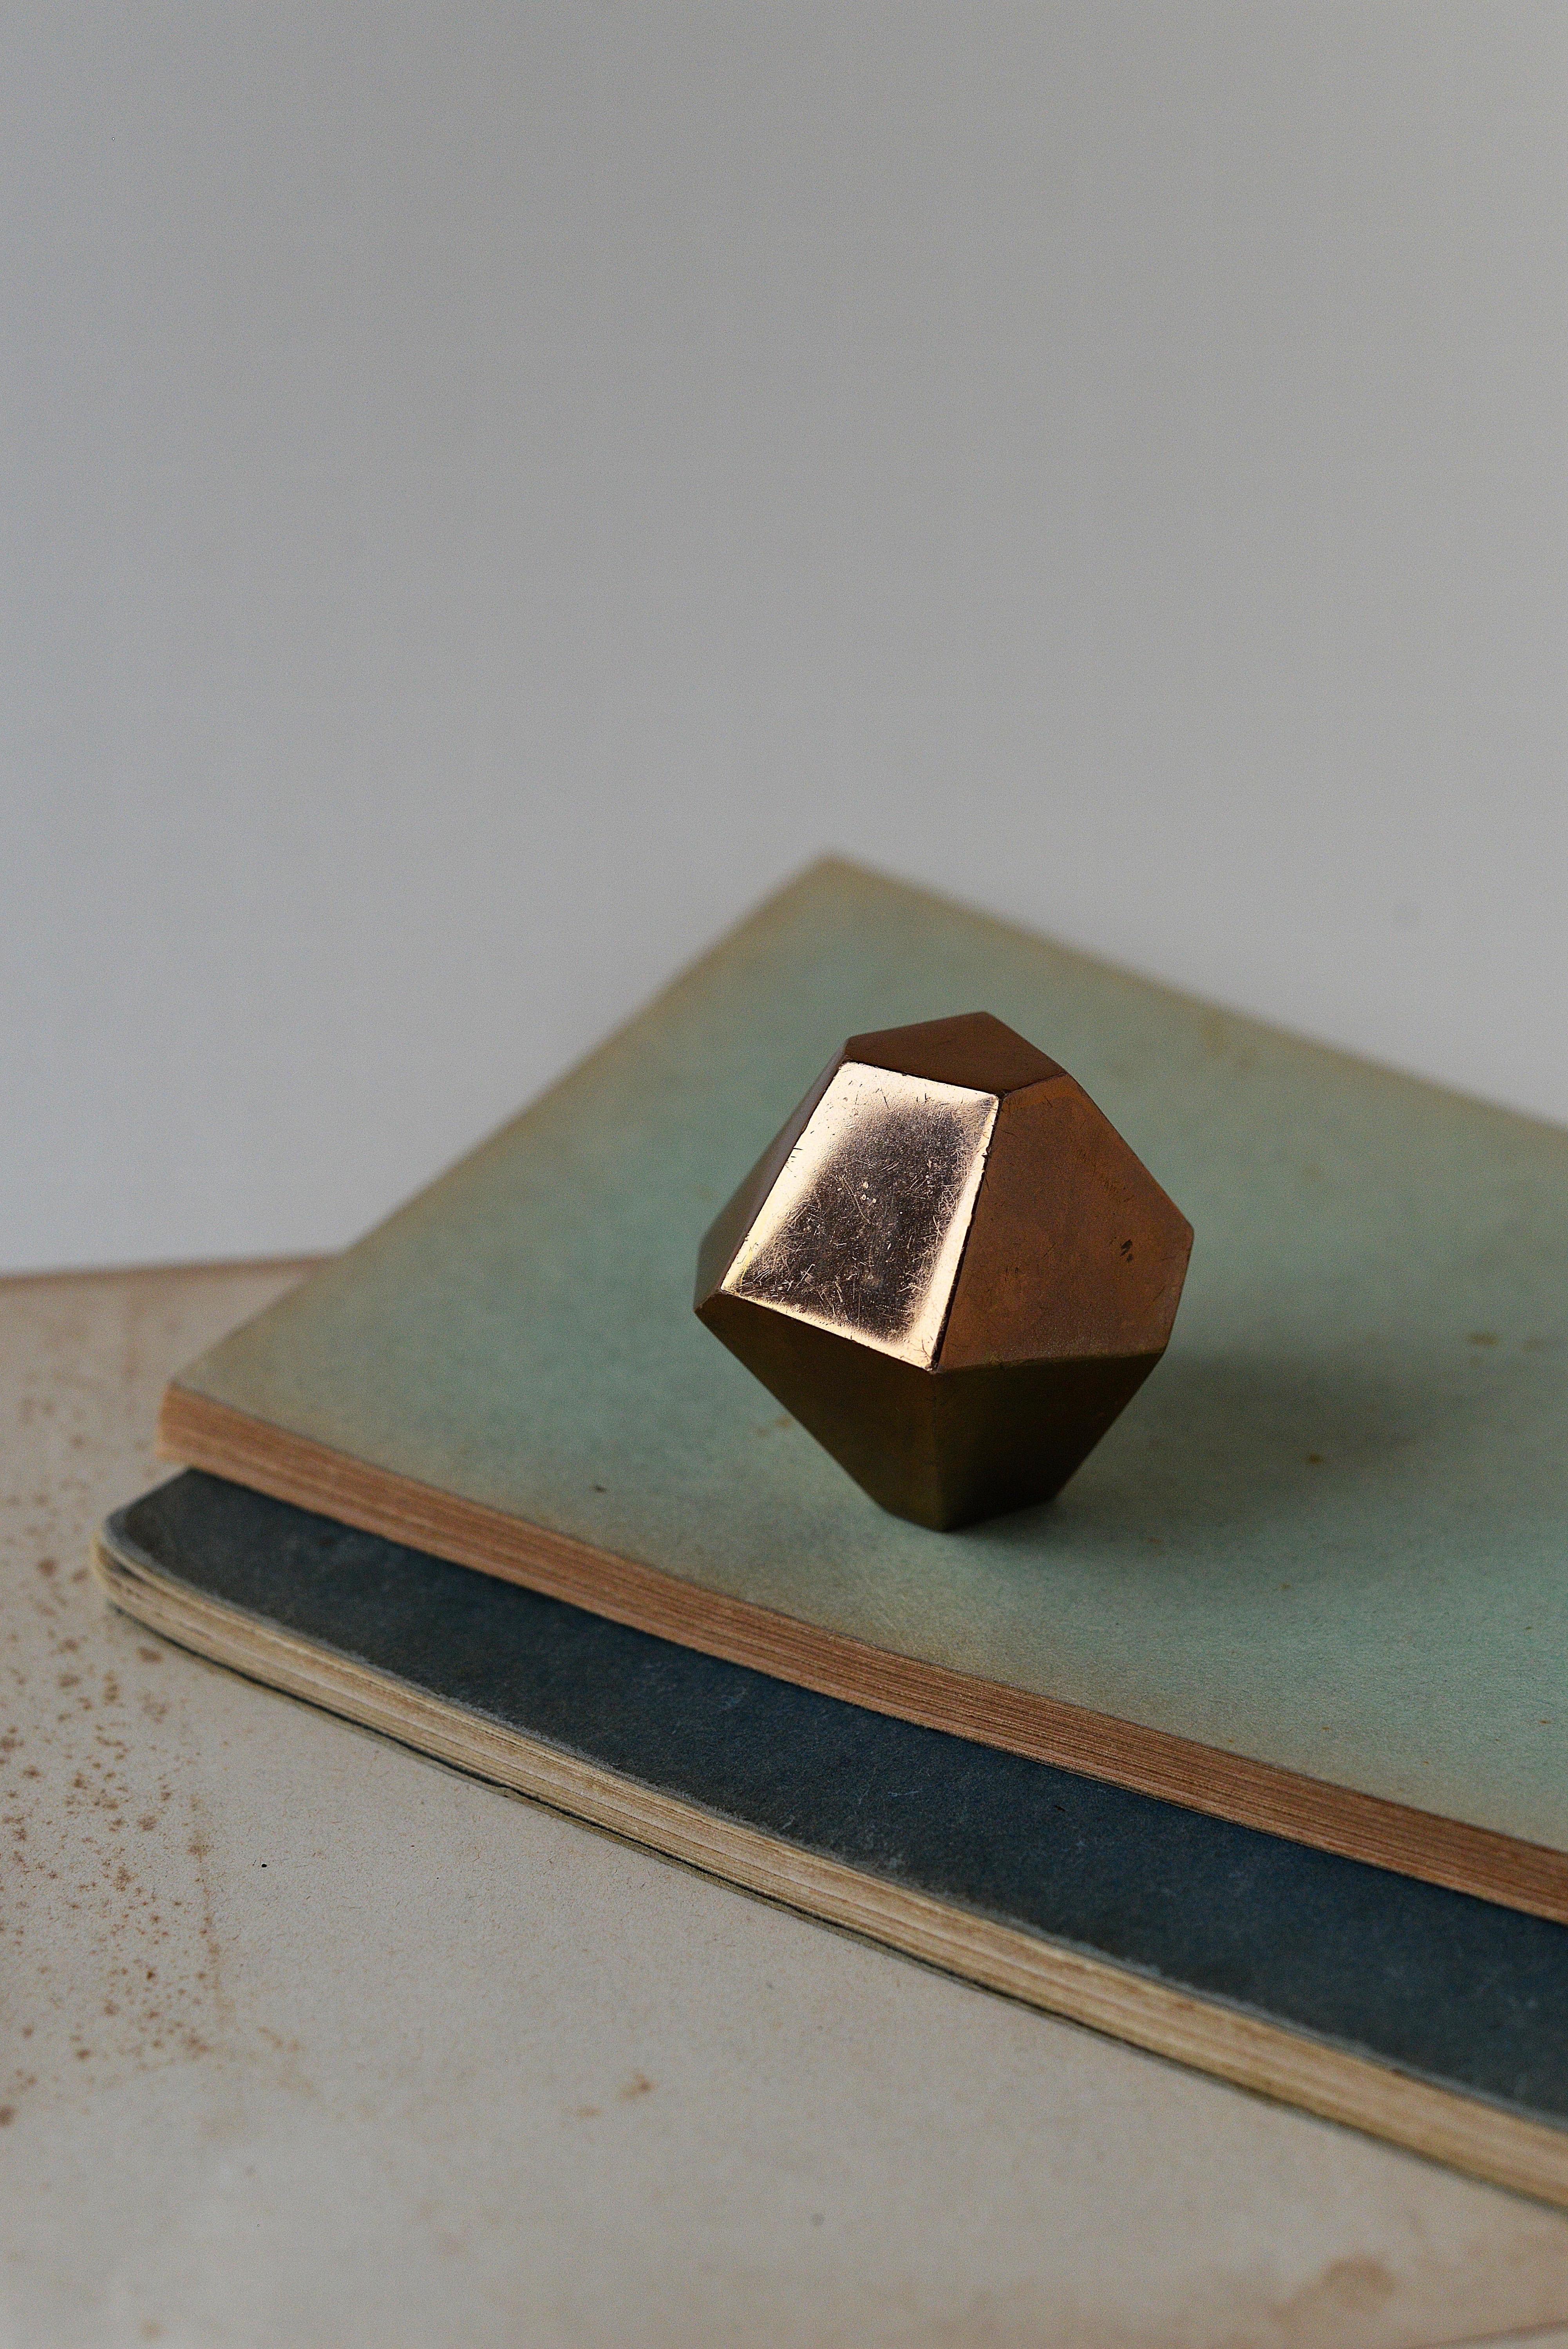 Bronze Geometric Paperweight, Brass-Plated, 1980s For Sale 1